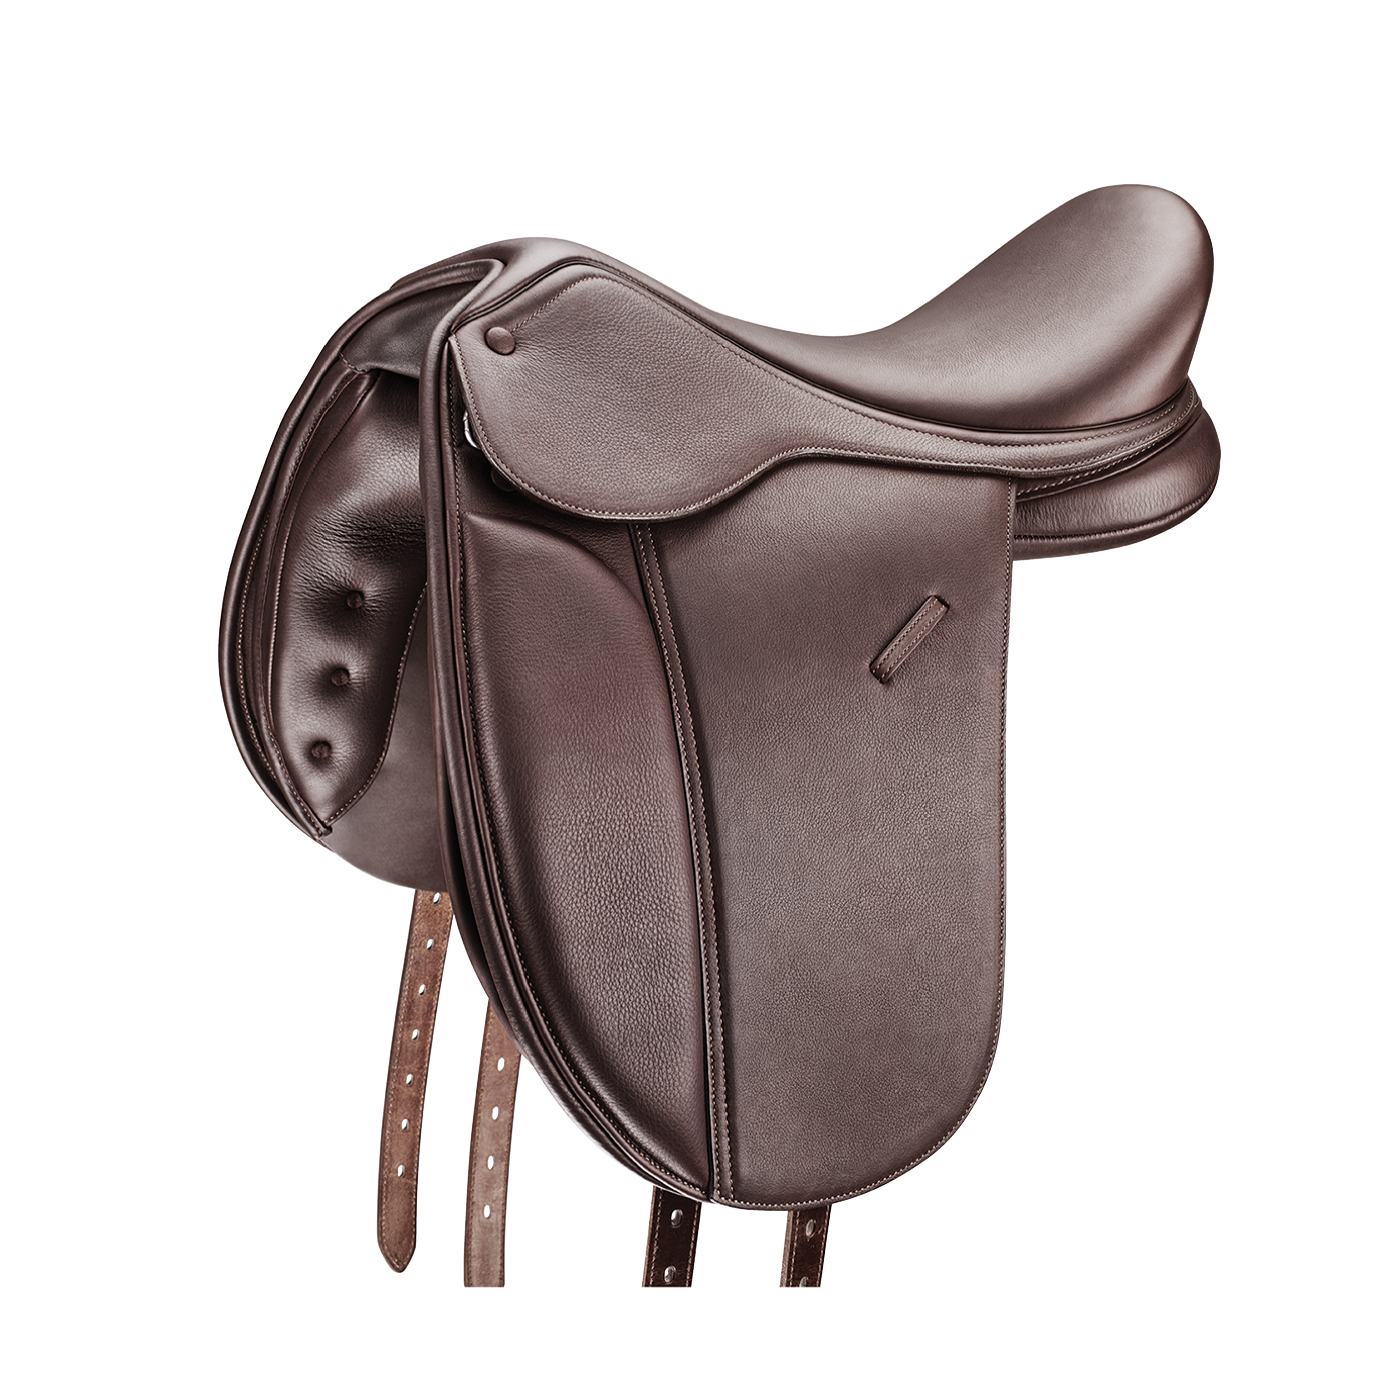 Bates Pony Show in Classic Brown Opulence Leather with long flap (DISPLAY MODEL)